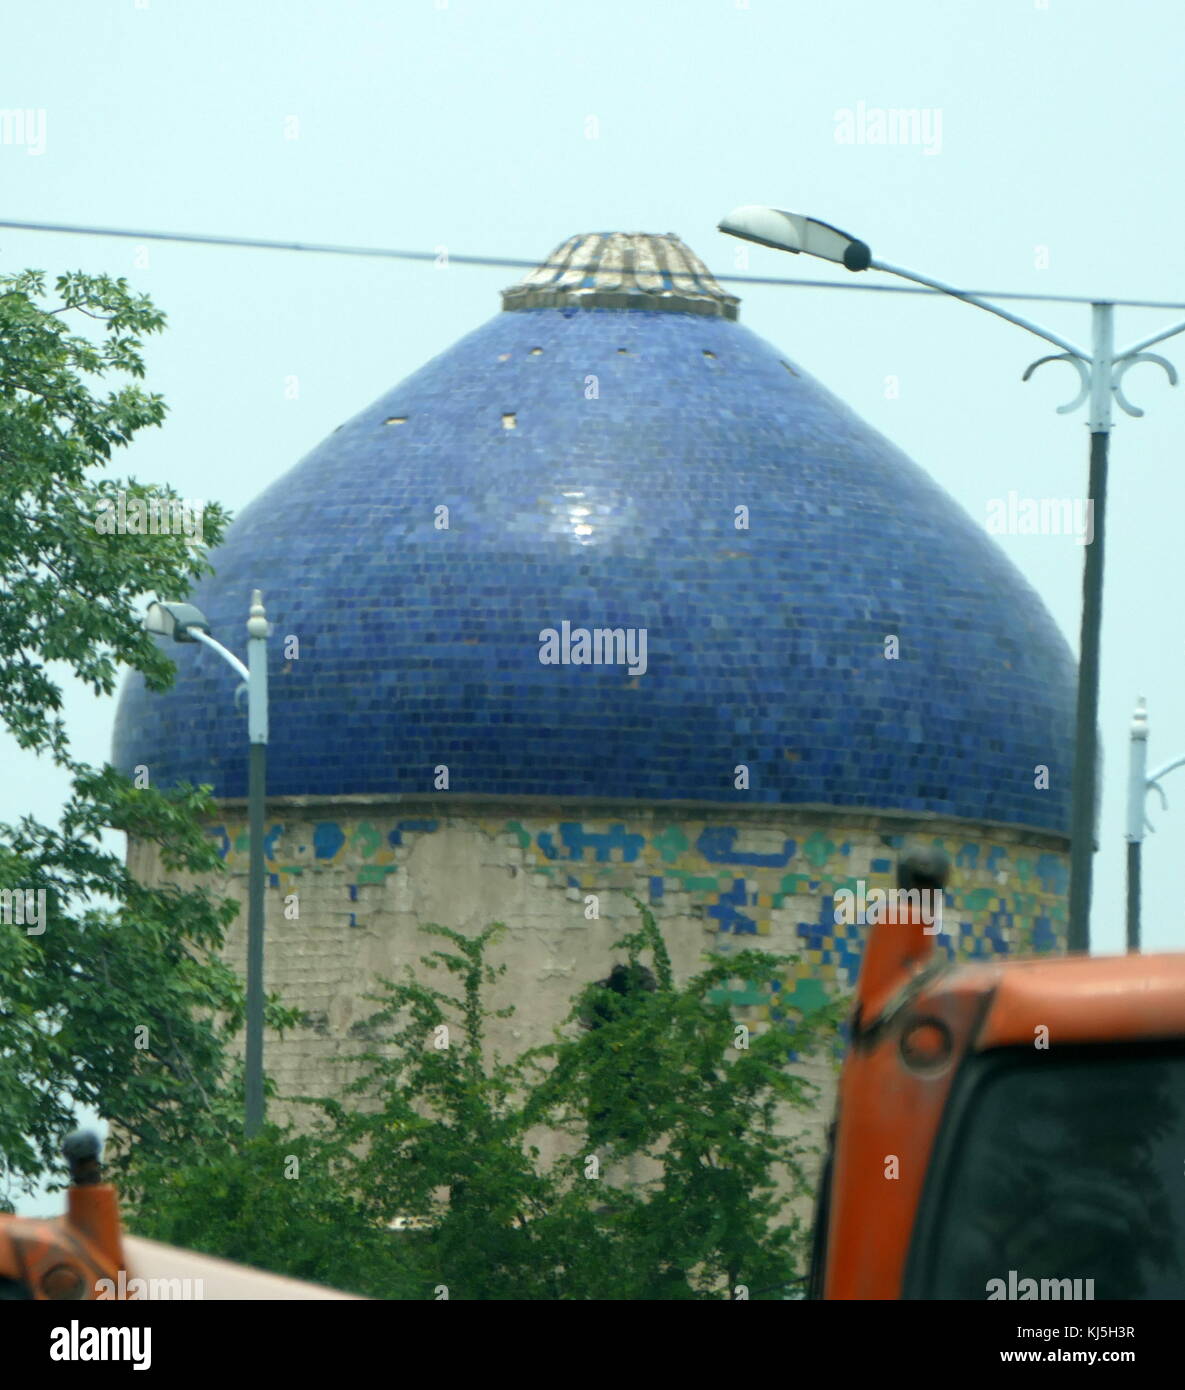 Sabz Burj, a Persian-influenced dome in Delhi, India has Persian-blue coloured tiles on its outer surface. located close to the Humayun’s Tomb Complex. The tower is referred to as “Neeli Chattri” (Blue umbrella). supposedly built in between 1530-50 A.D. influenced by Central Asian architecture. Stock Photo